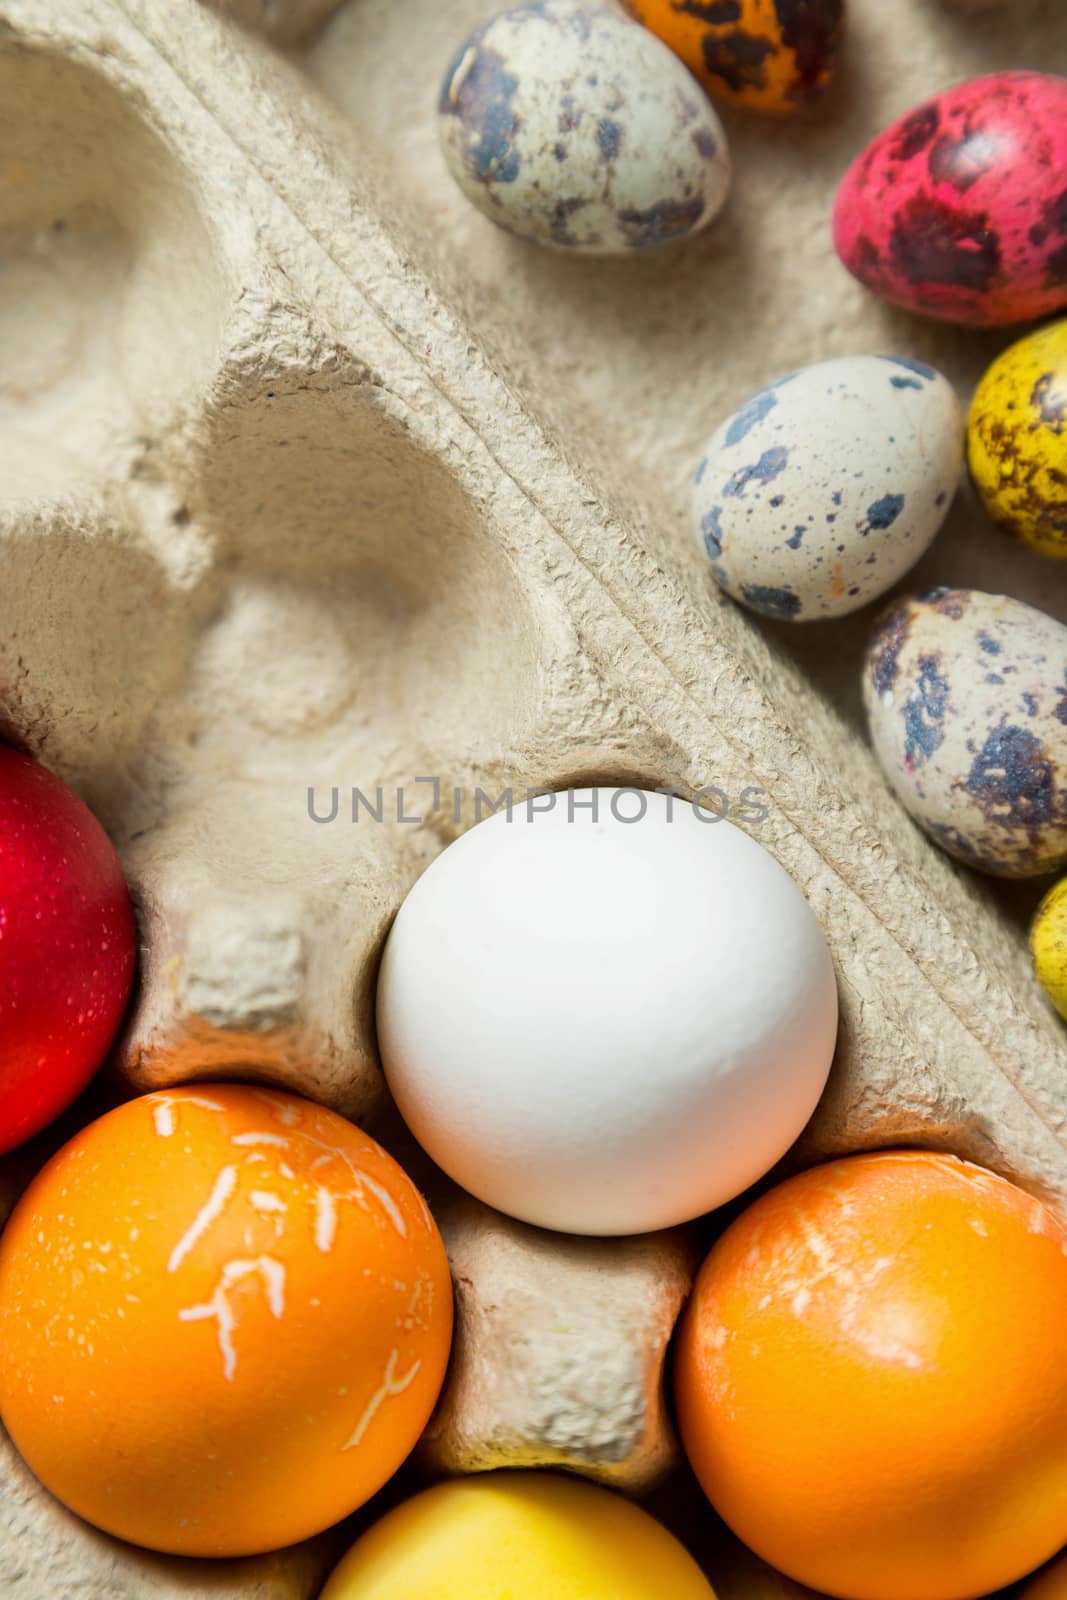 Dyed easter eggs in cardboard box on wooden background. by galinasharapova